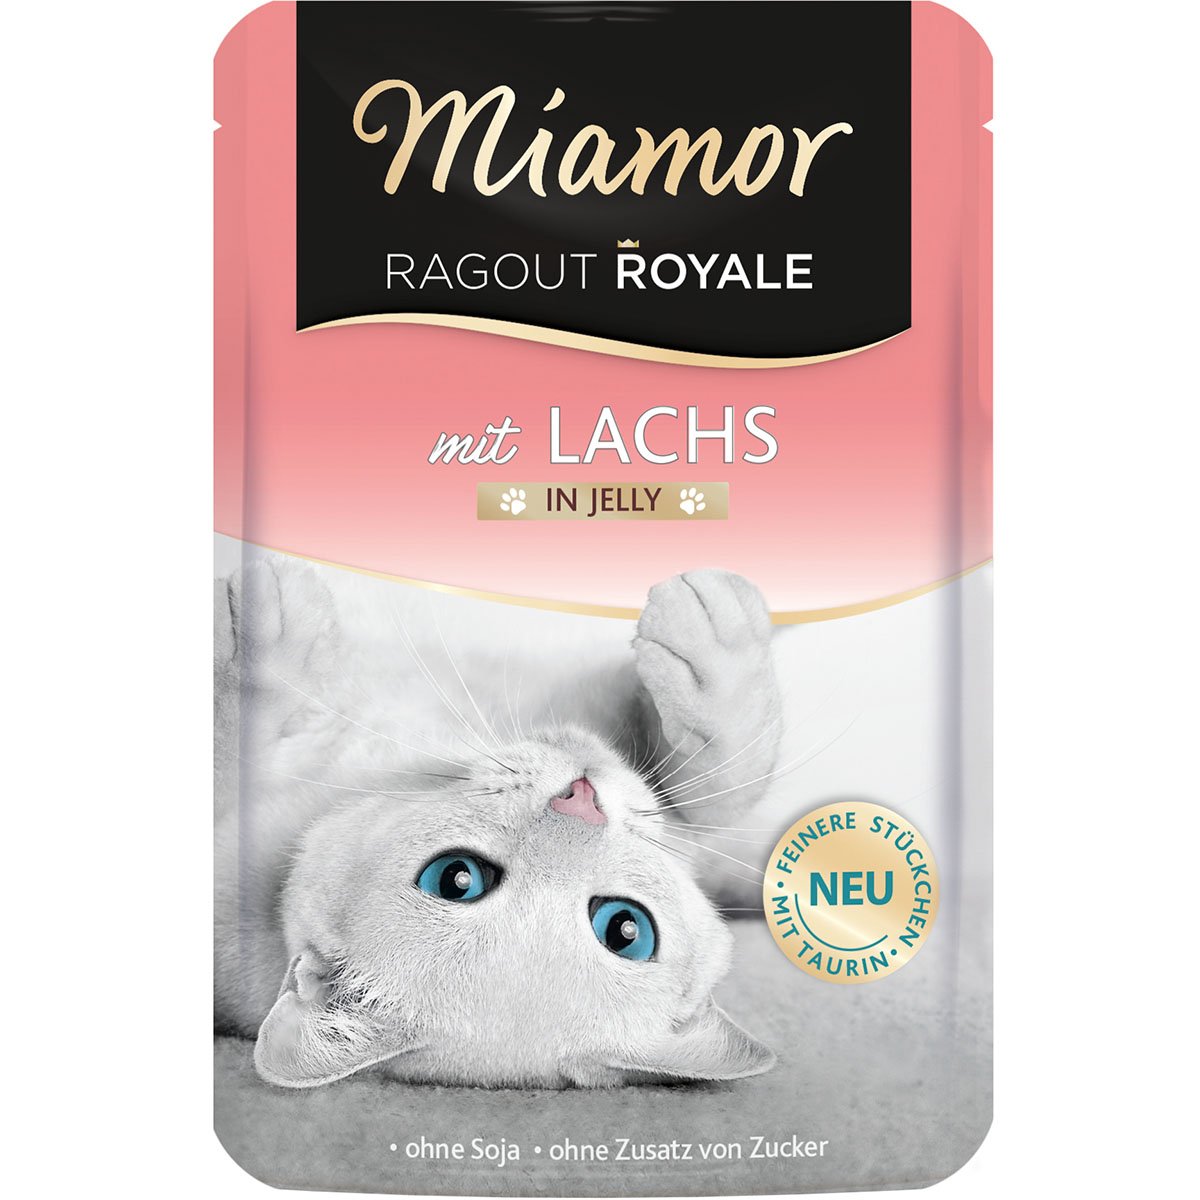 Miamor Ragout Royale Lachs in Jelly 44x100g